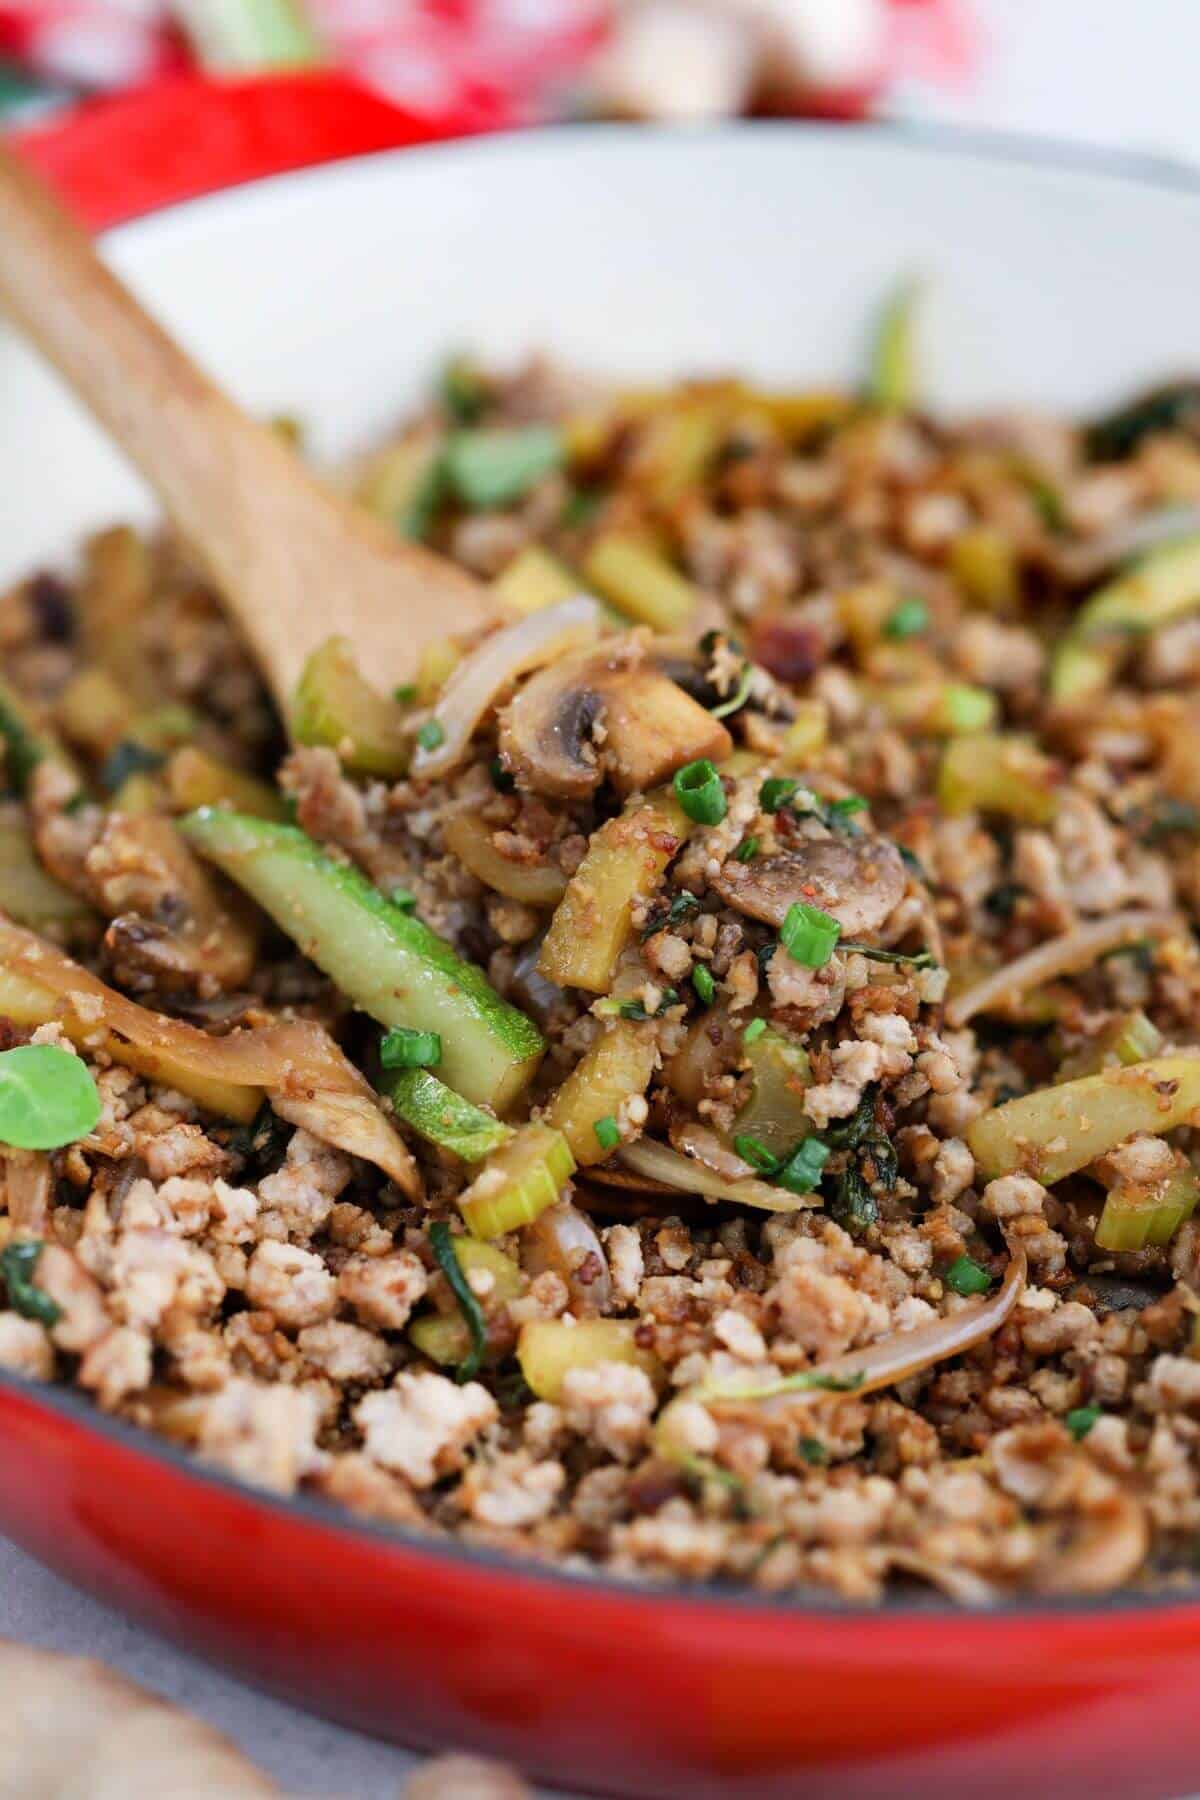 Ground pork with vegetables in a pan with a wooden spoon.